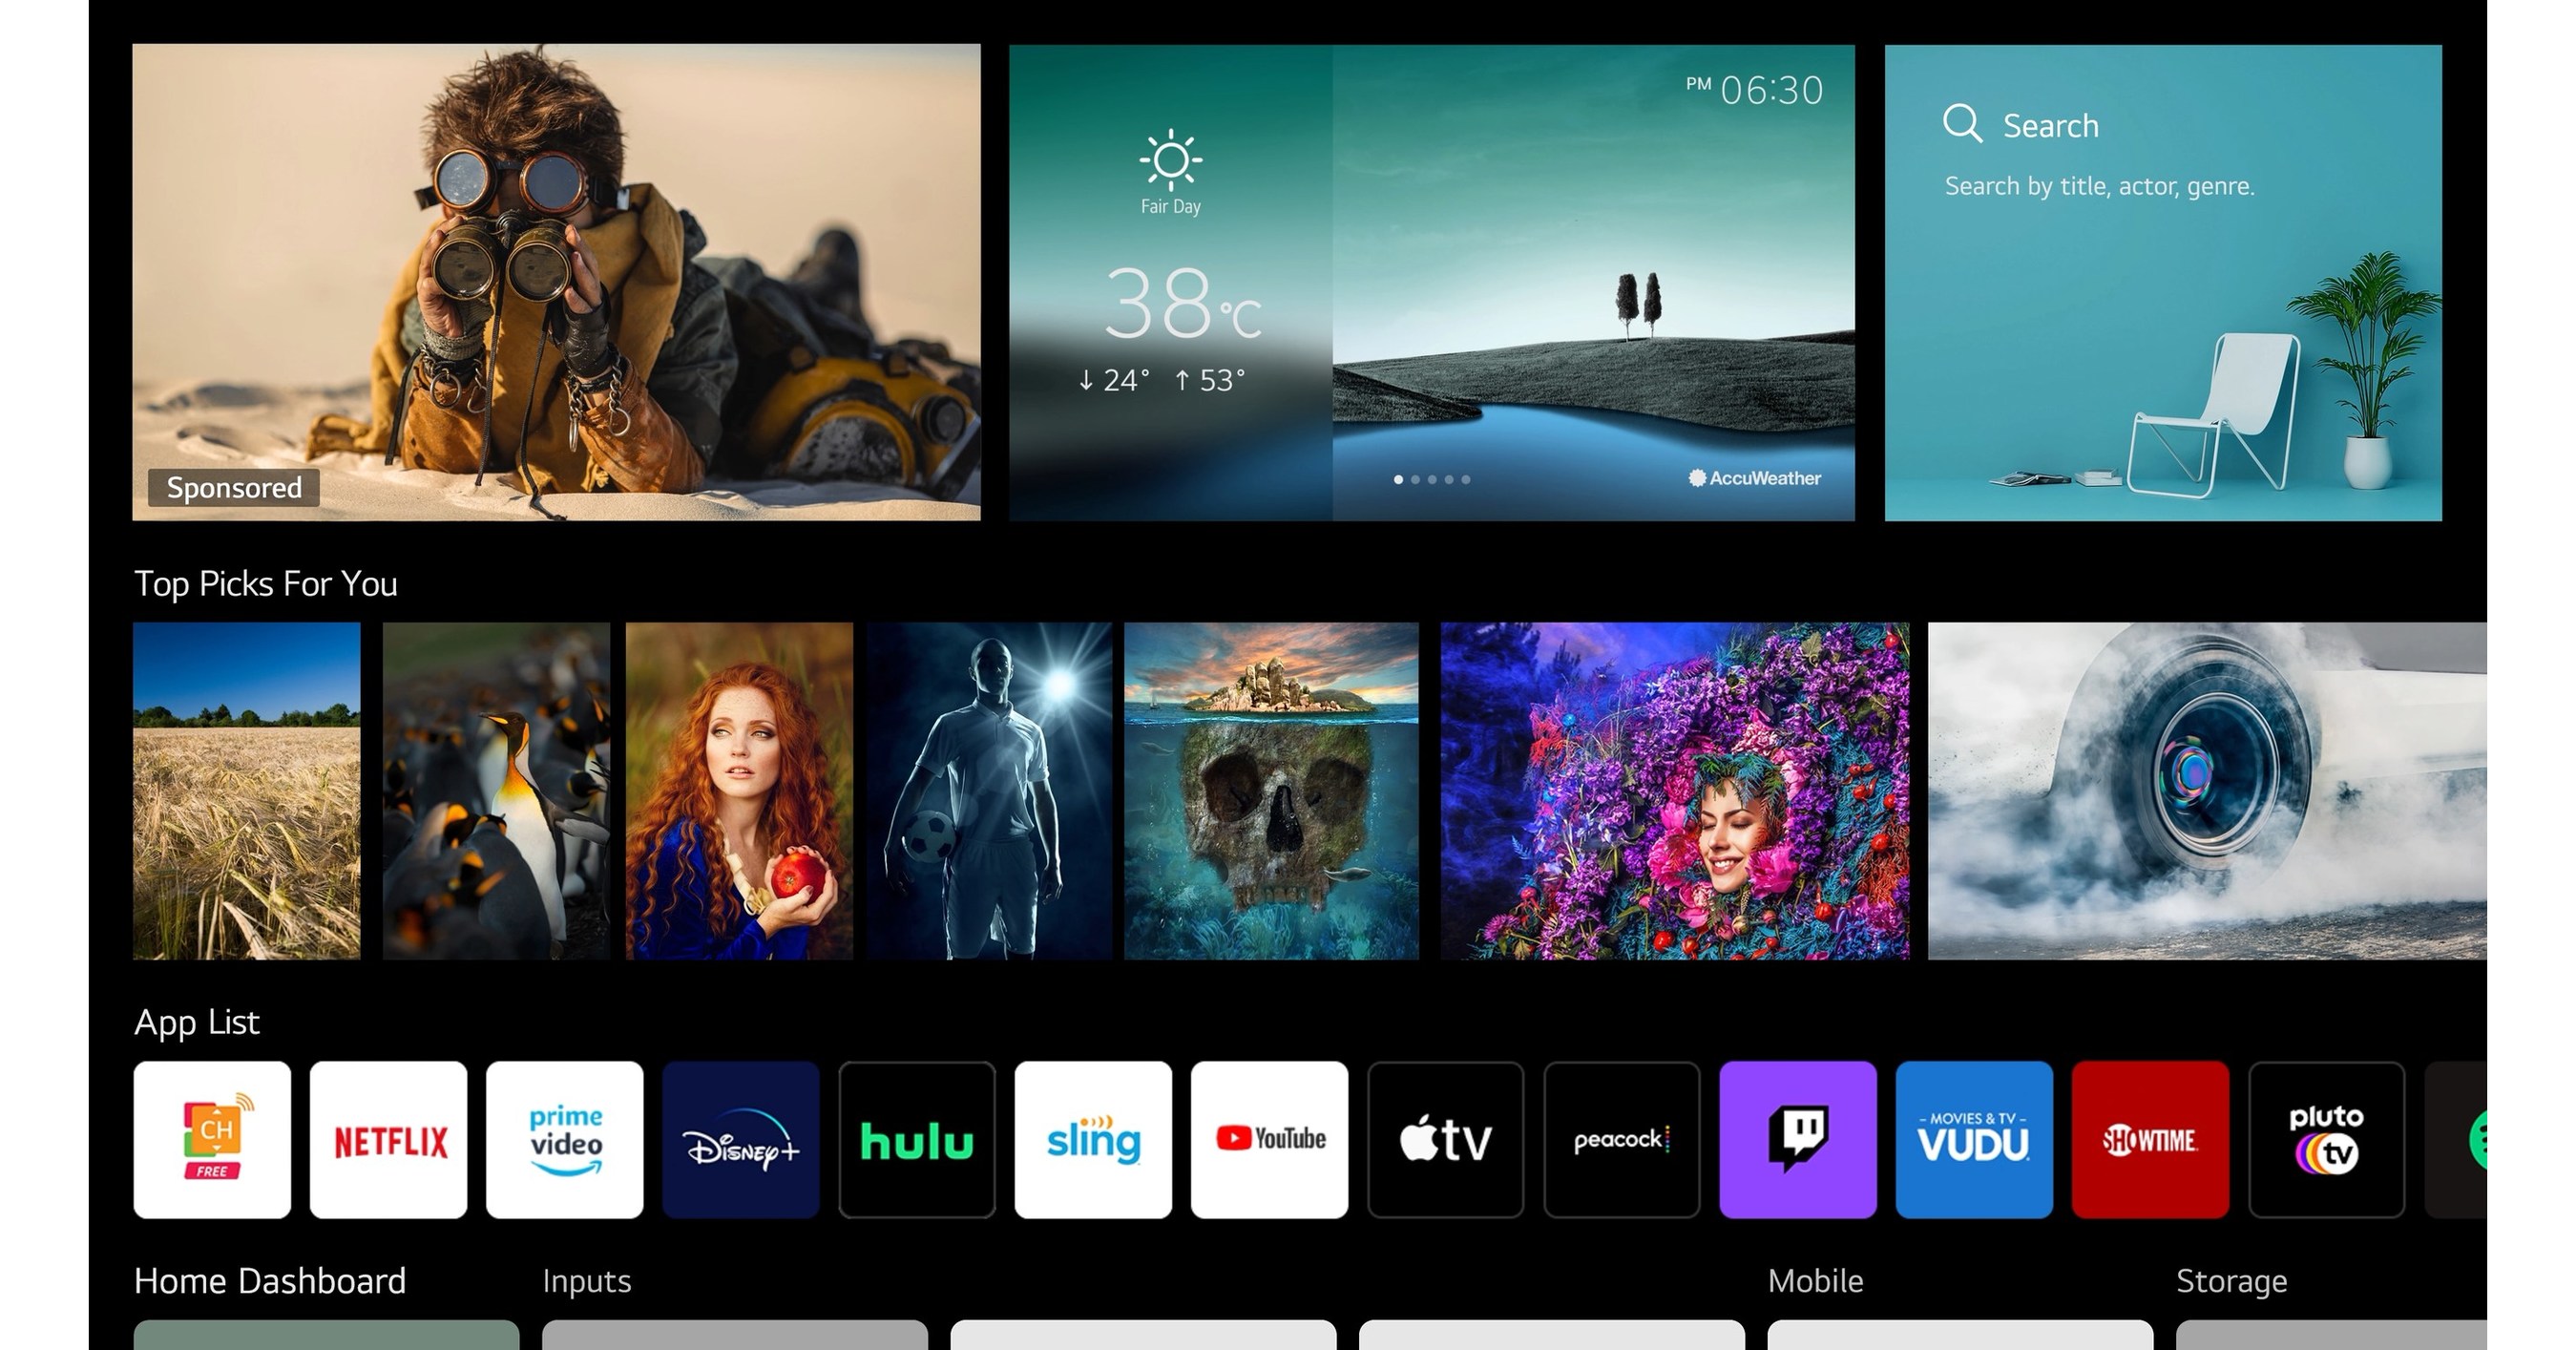 LG’s webOS 6.0 Smart TV platform is designed for how viewers consume content today